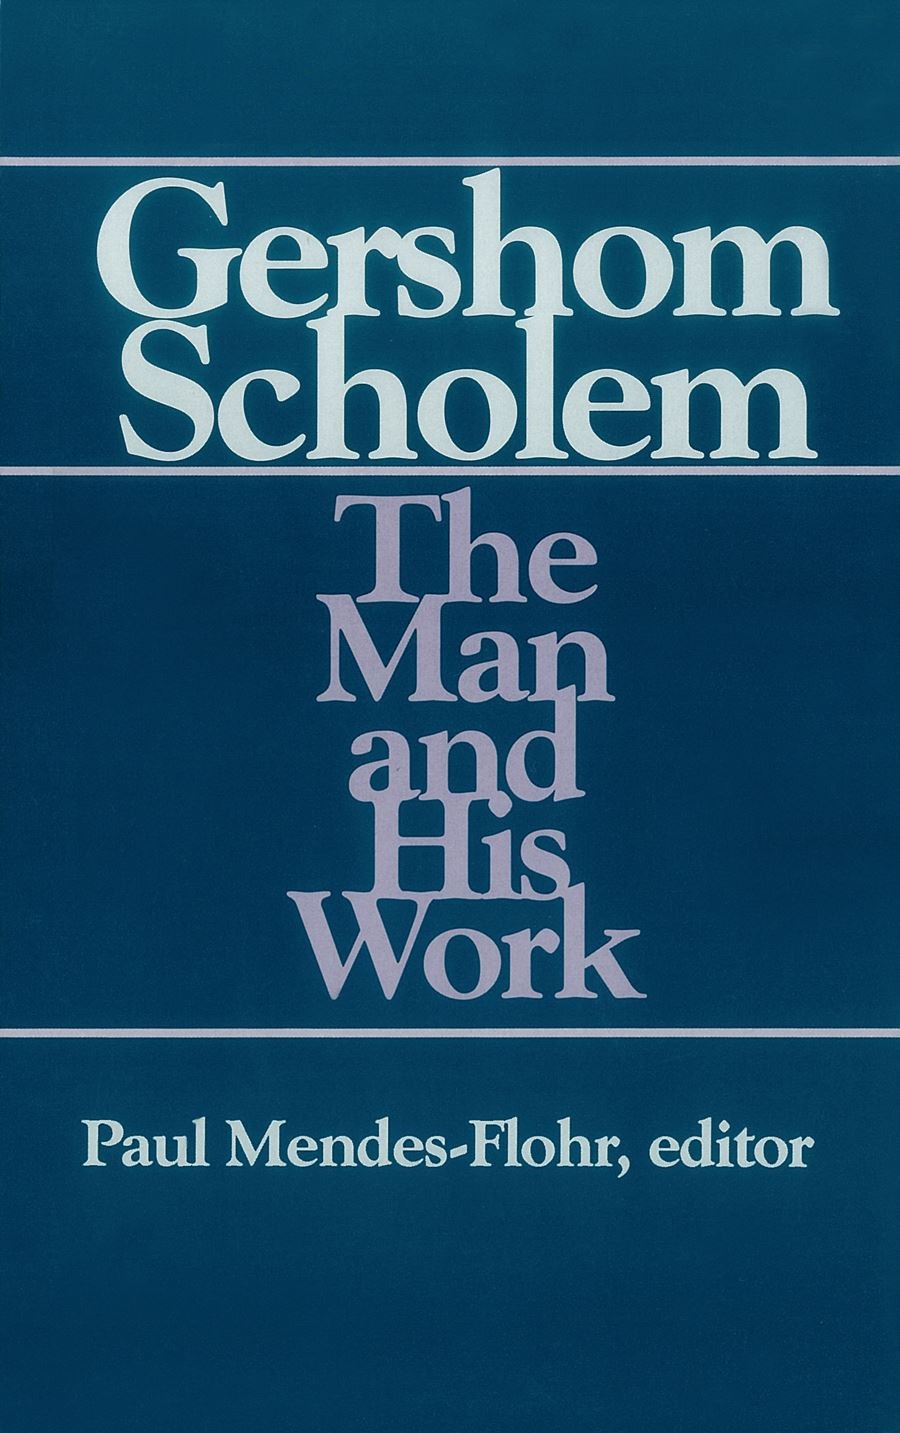 Gershom Scholem – The Man and His Work